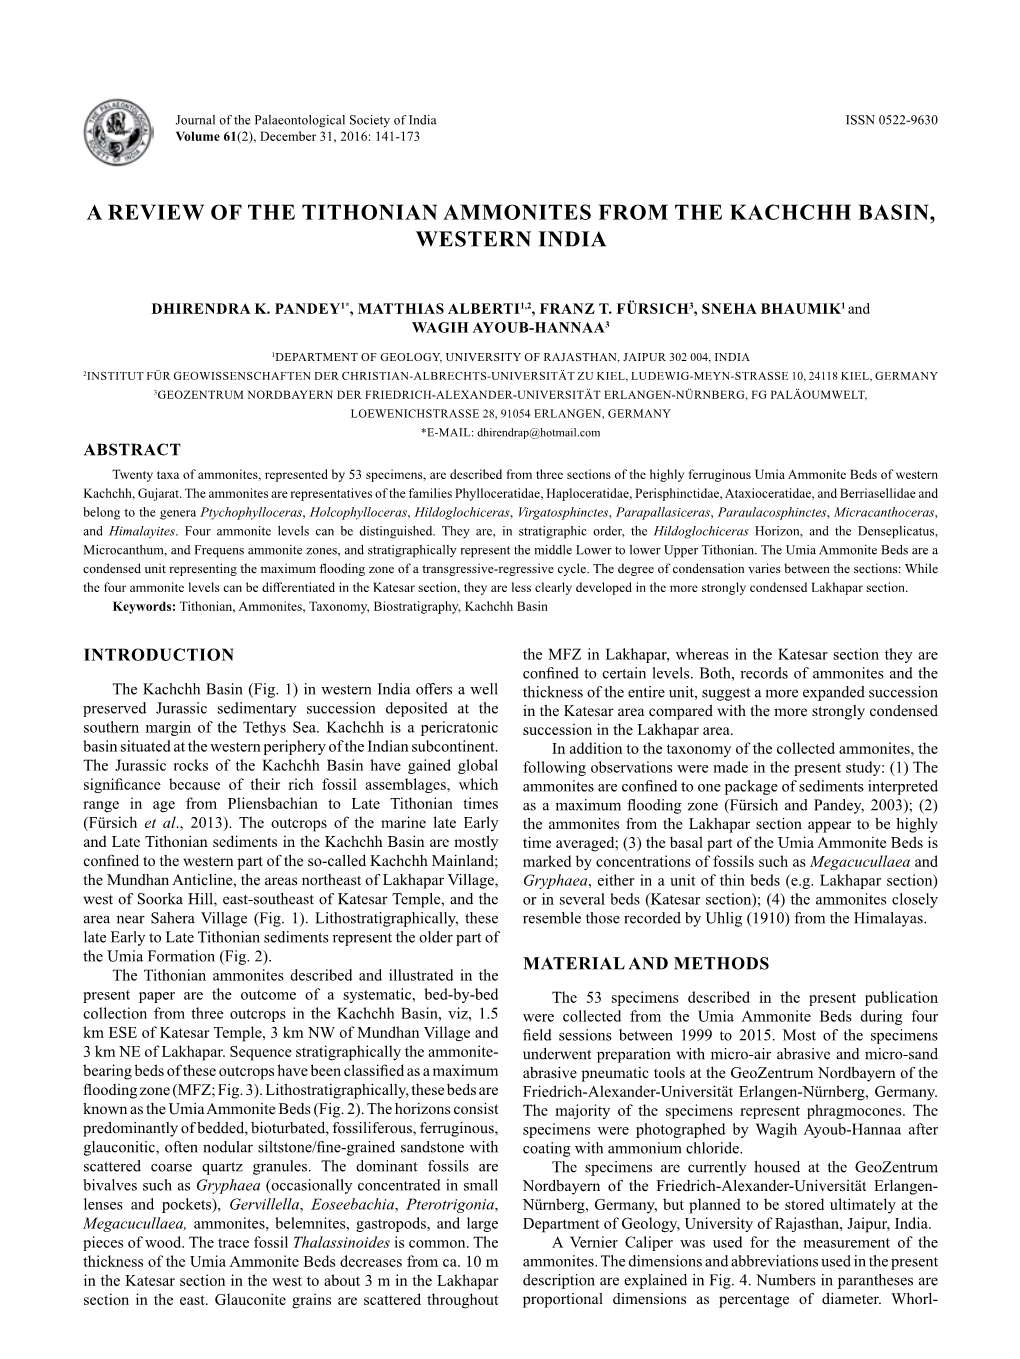 A Review of the Tithonian Ammonites from the Kachchh Basin, Western India